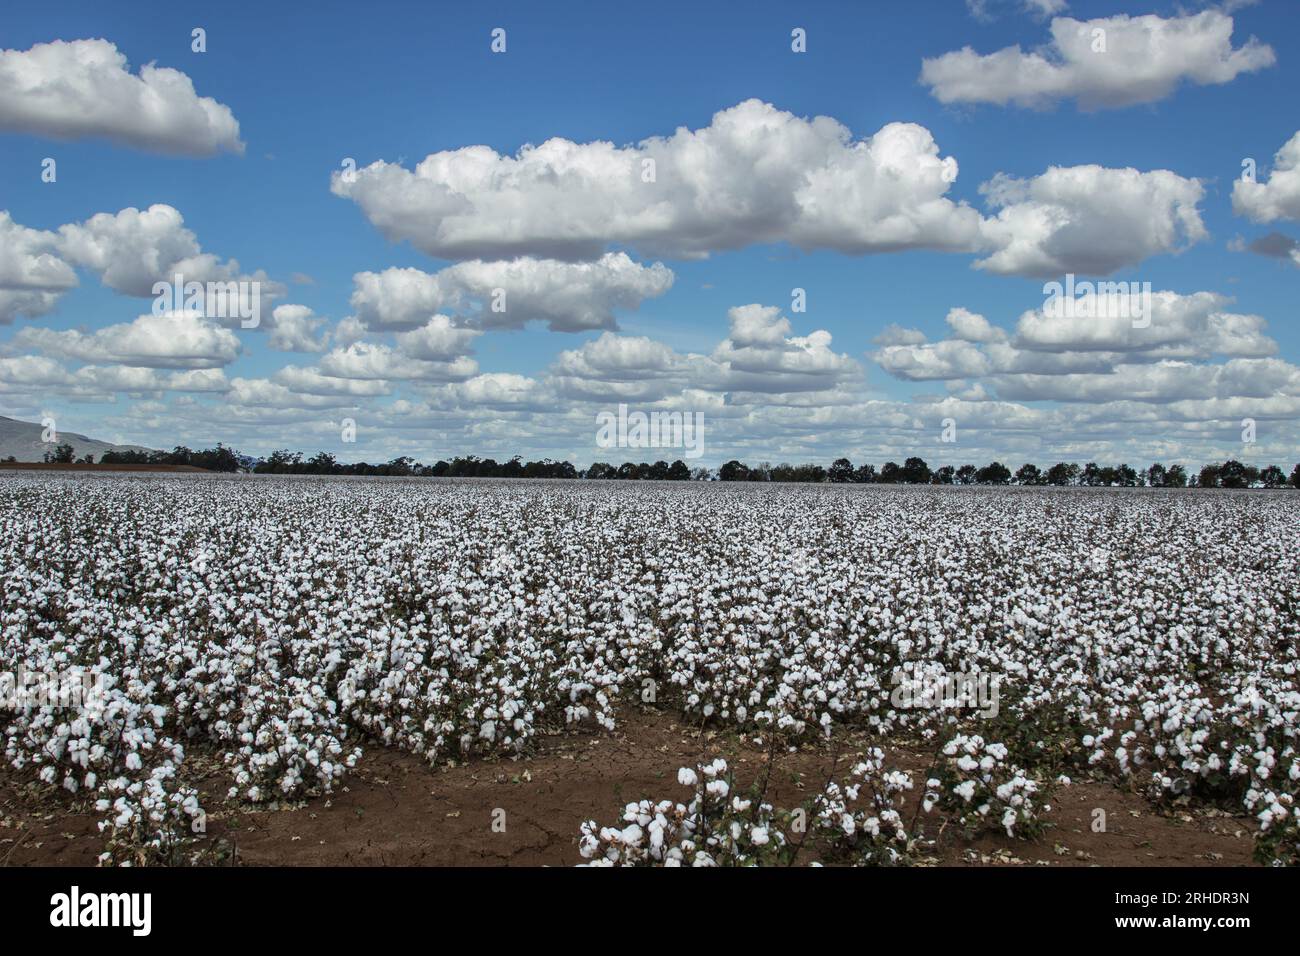 Paddock of cotton plants ready for harvest in australian landscape with fluffy clouds in sky Stock Photo